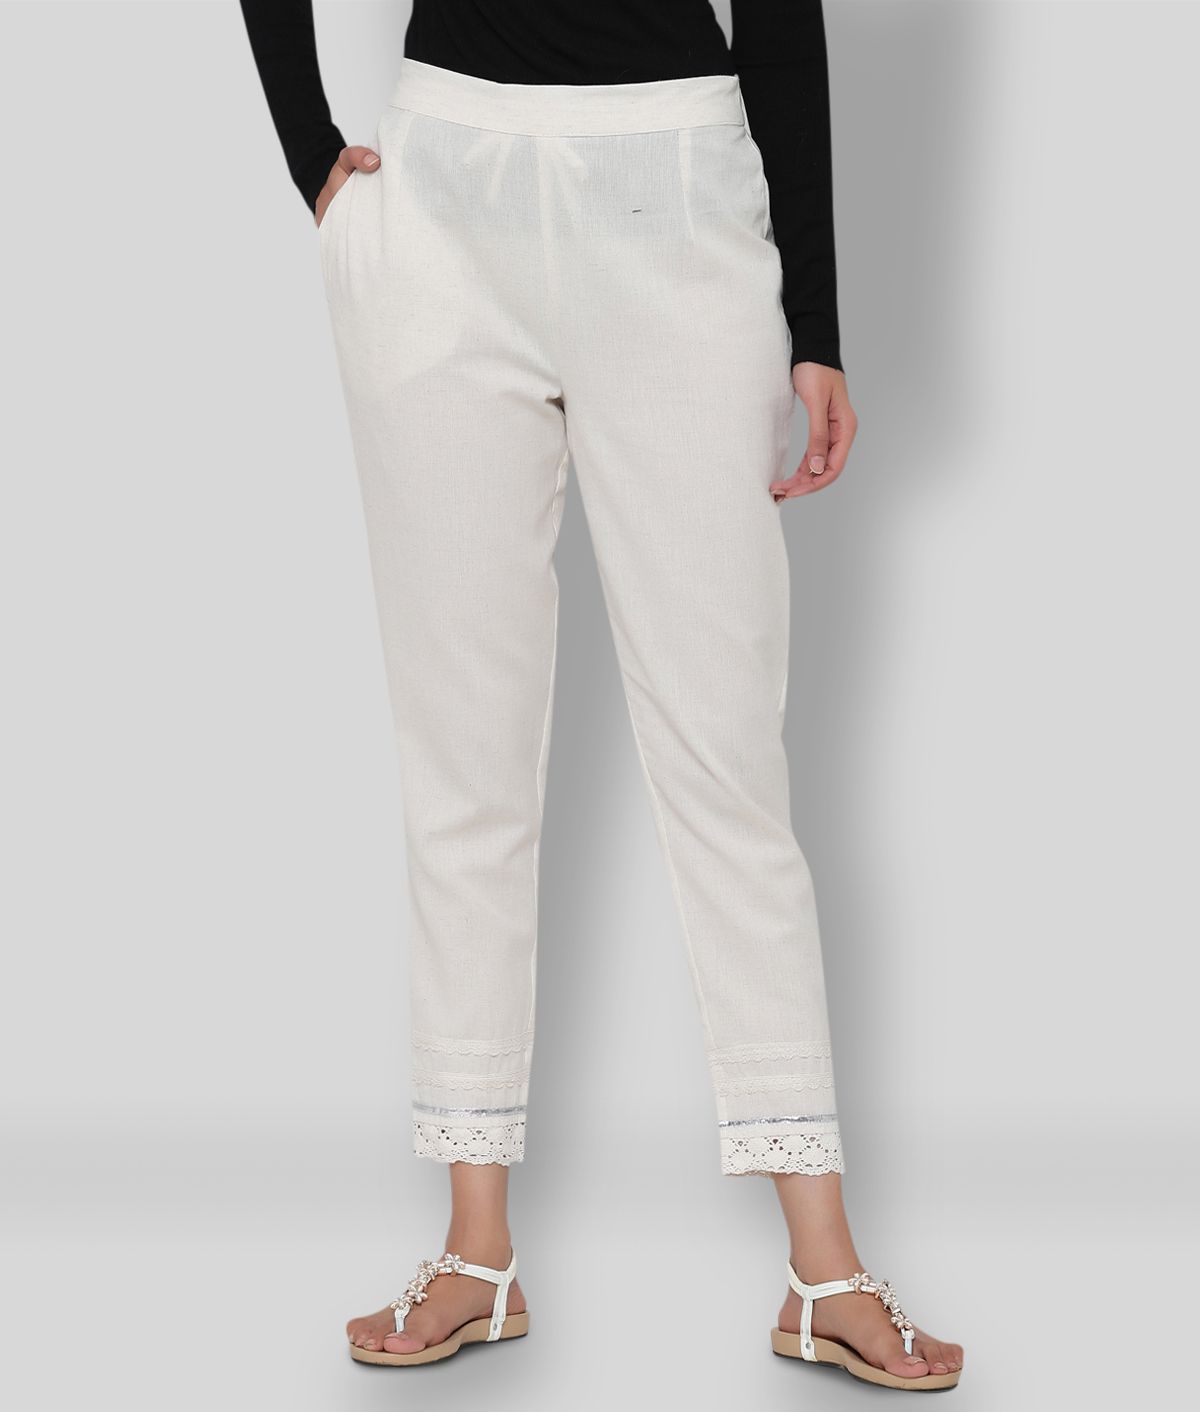     			Juniper - Off White Cotton Slim Fit Women's Casual Pants  ( Pack of 1 )